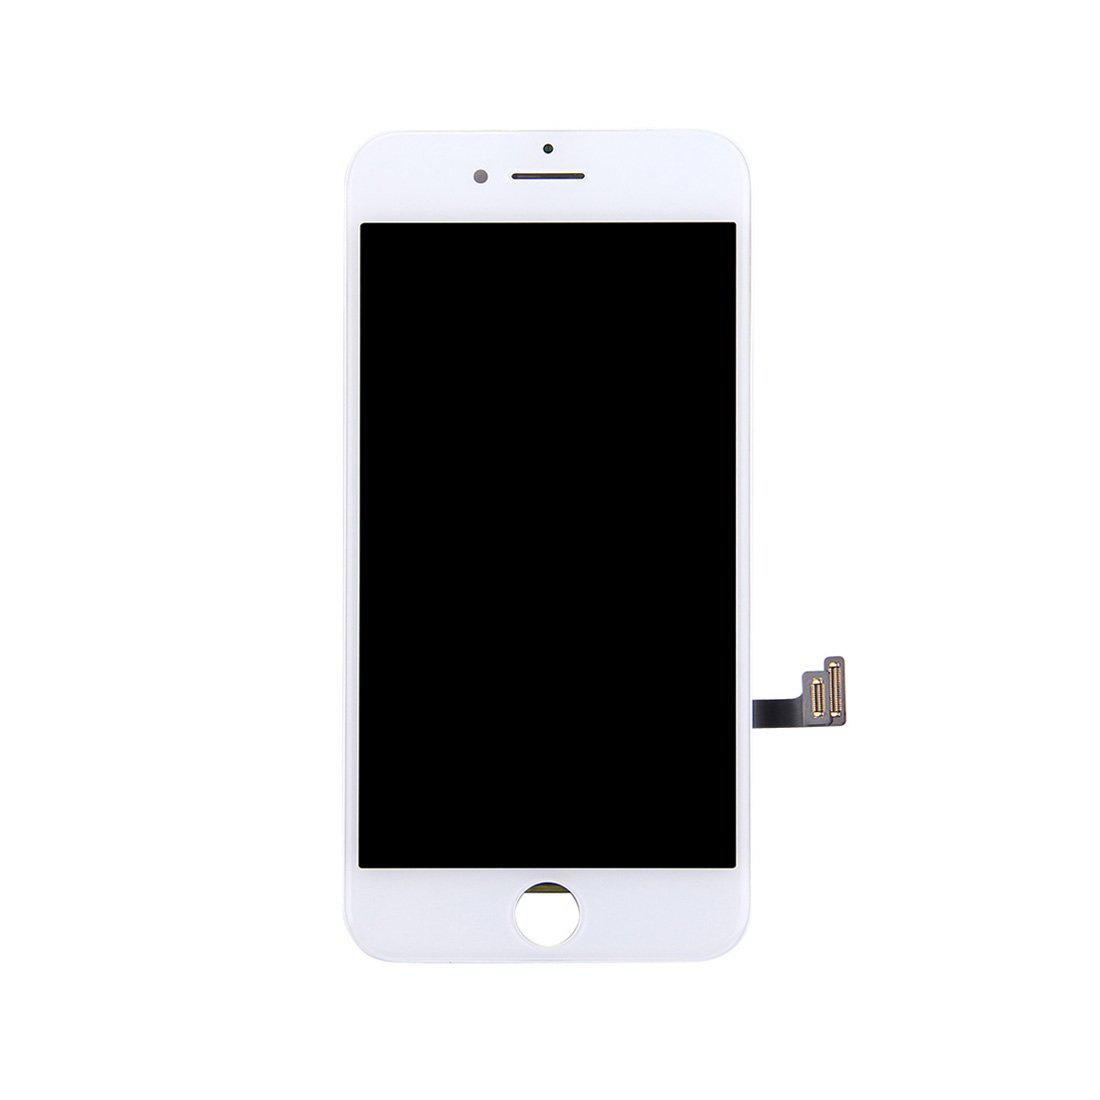 Apple iPhone 7 Replacement LCD Touch Screen Assembly - White for [product_price] - First Help Tech